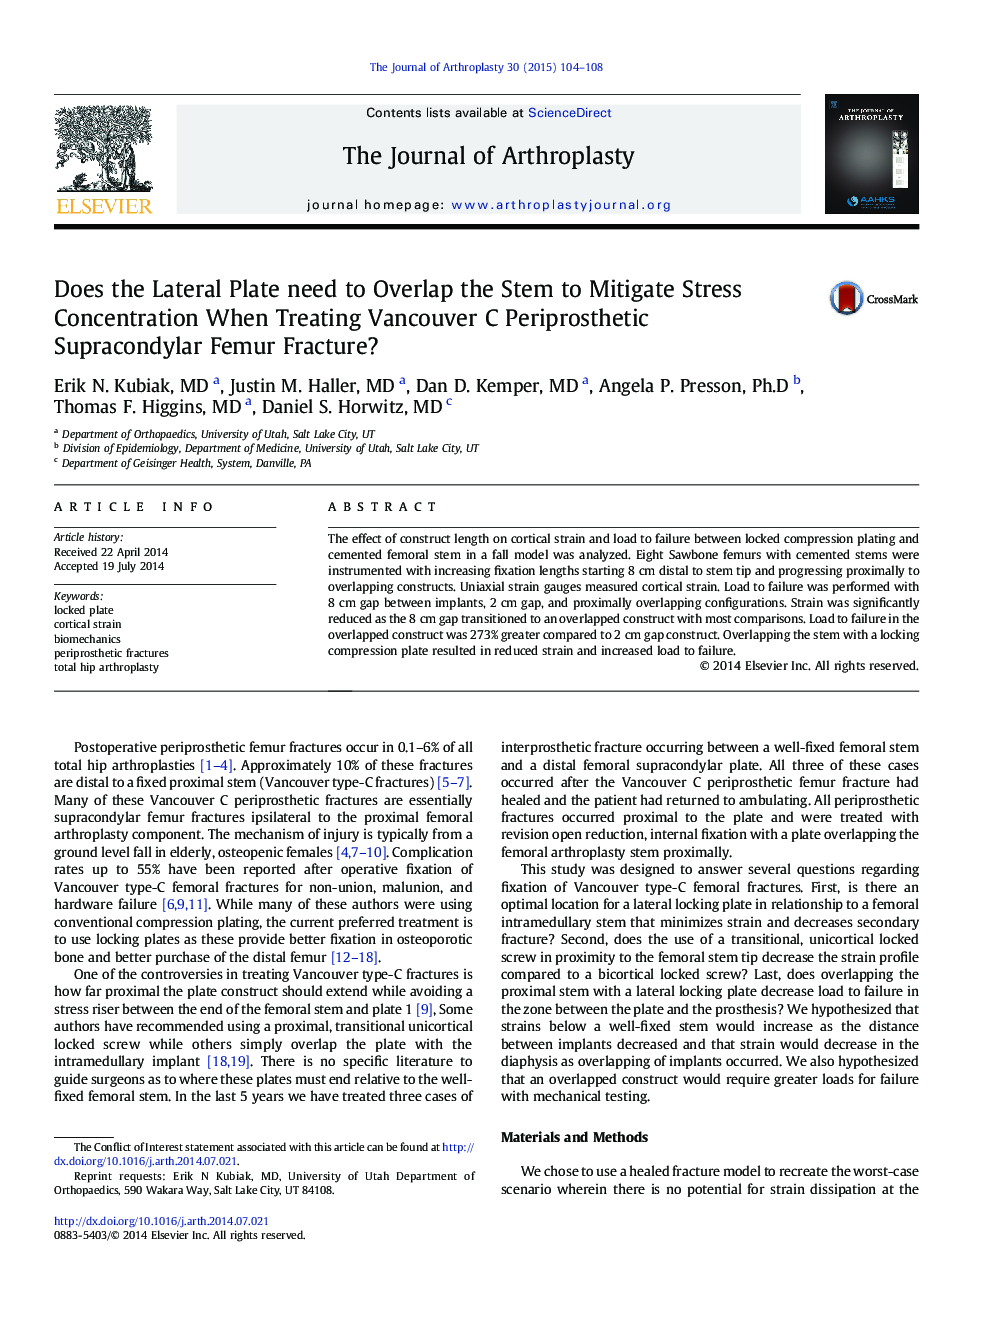 Does the Lateral Plate need to Overlap the Stem to Mitigate Stress Concentration When Treating Vancouver C Periprosthetic Supracondylar Femur Fracture? 